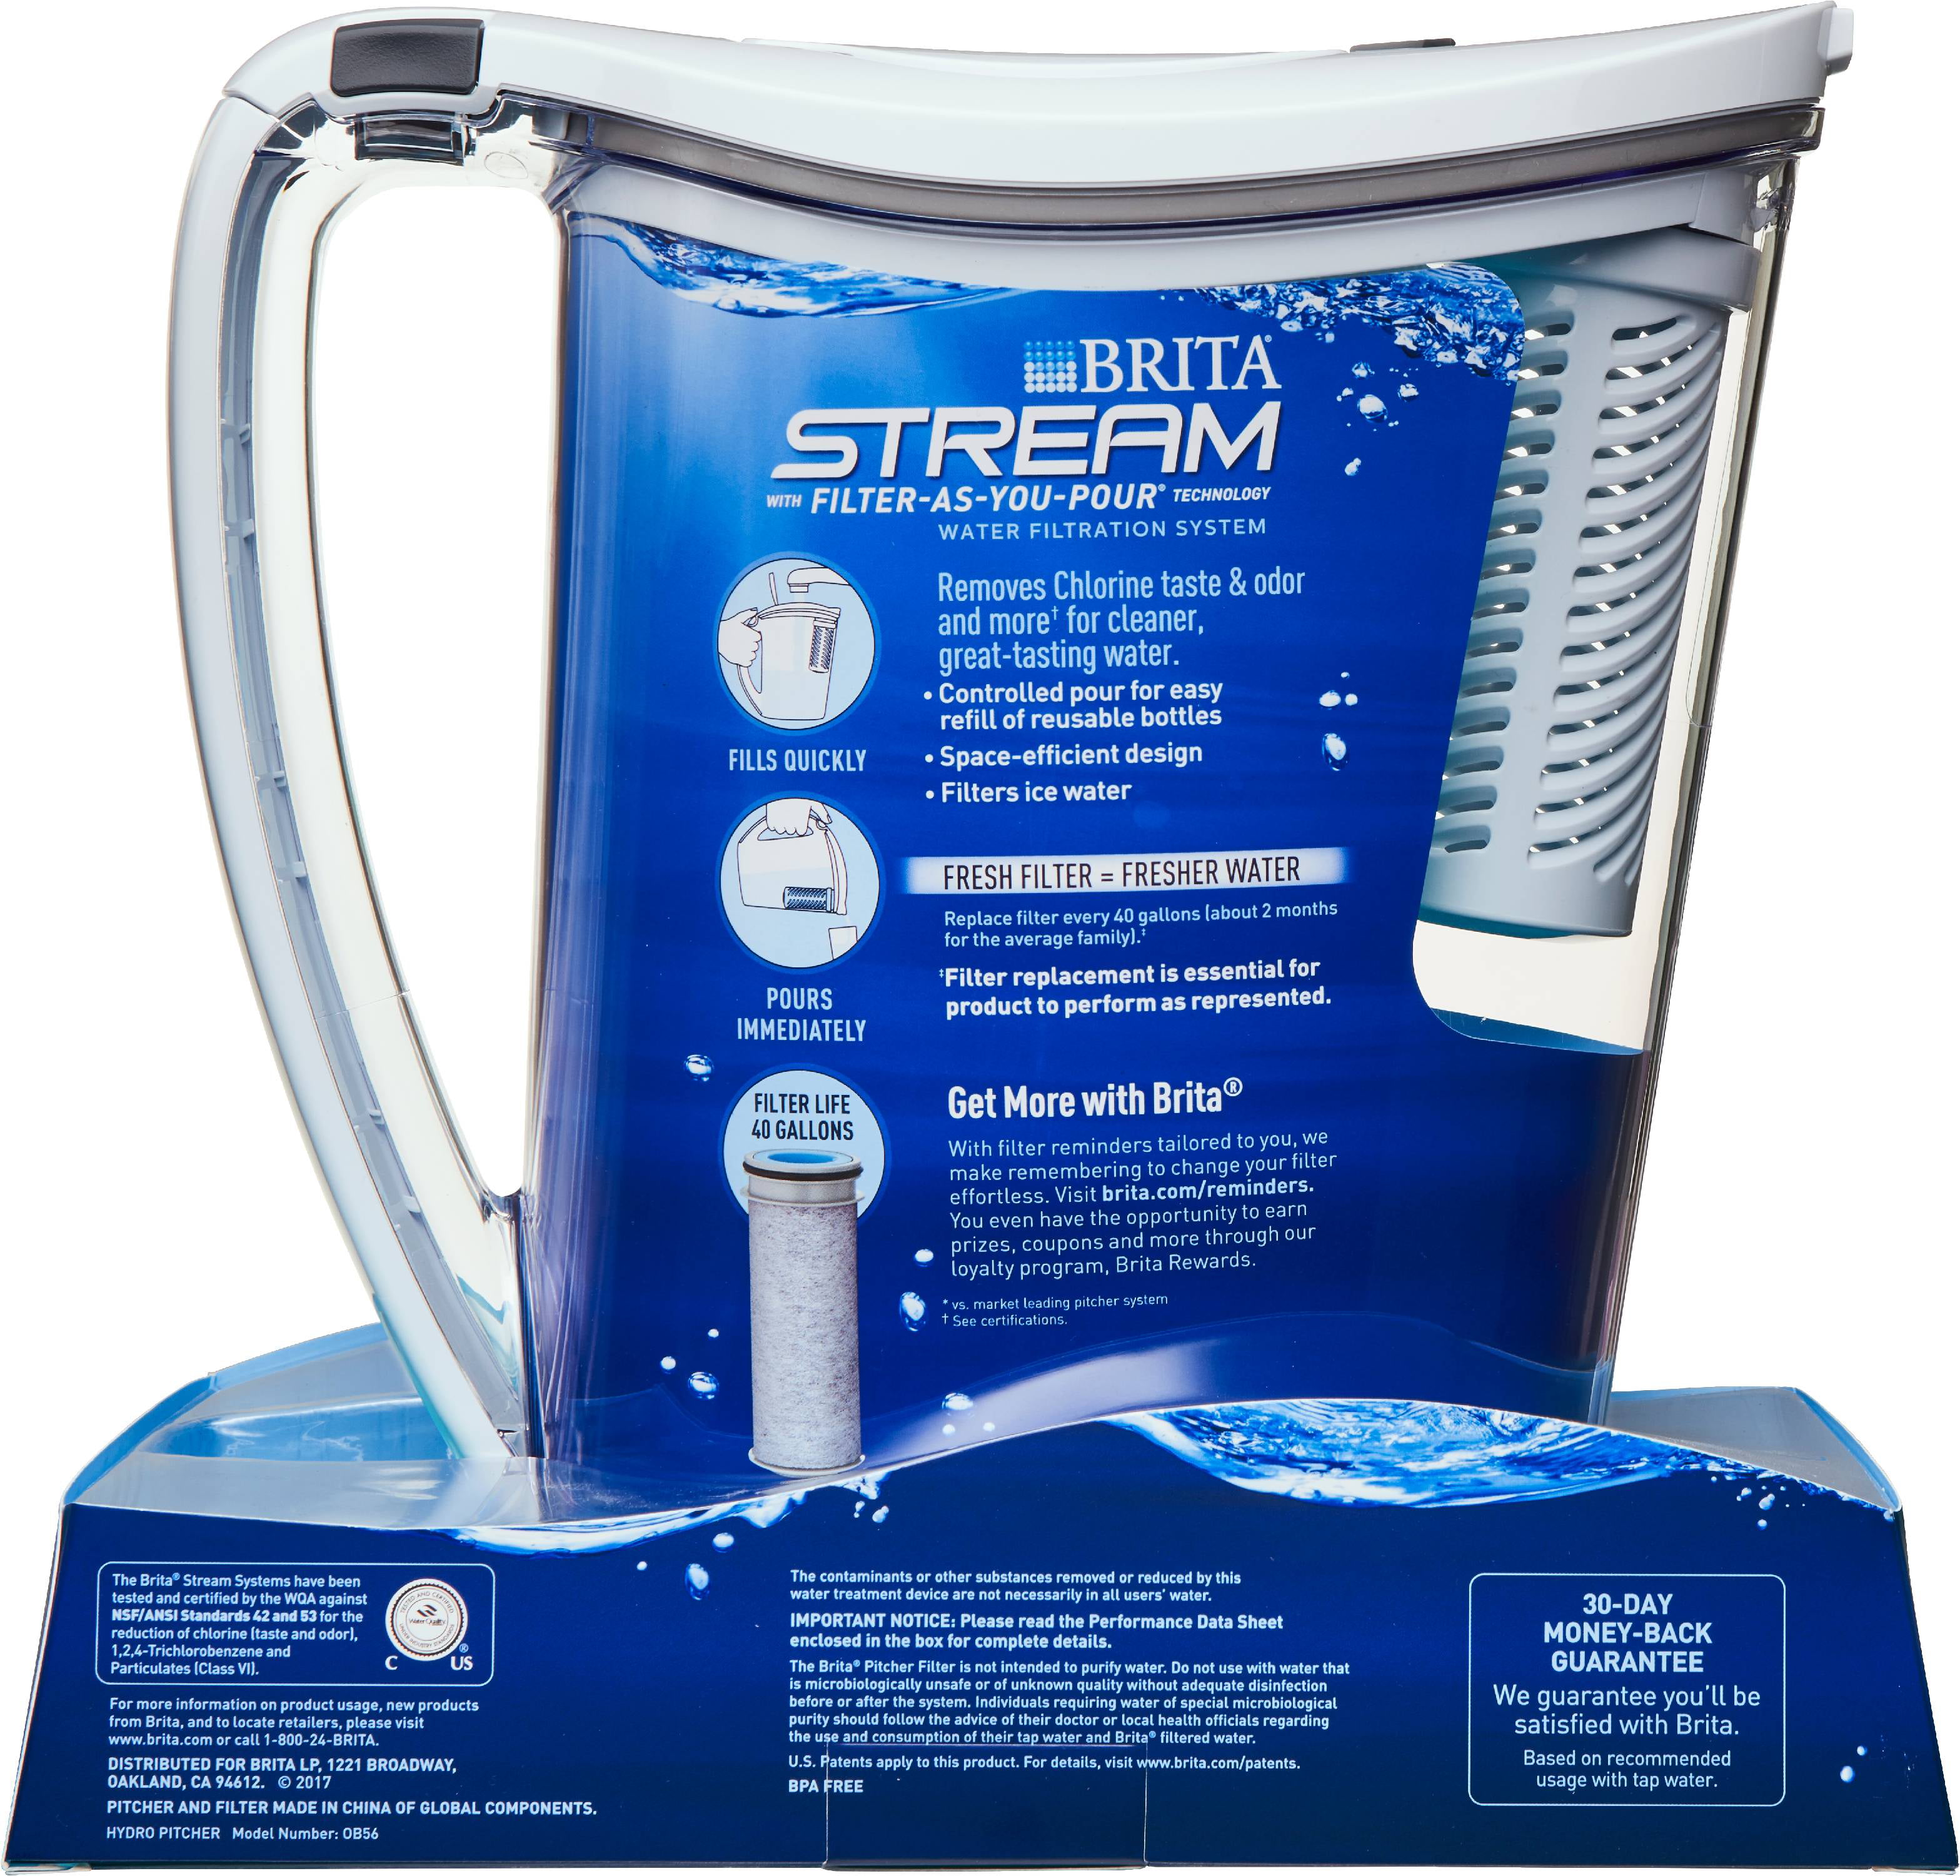 GREY BRITA Stream Filter-As-You-Pour Water Pitcher with 1 Filter 10 Cup